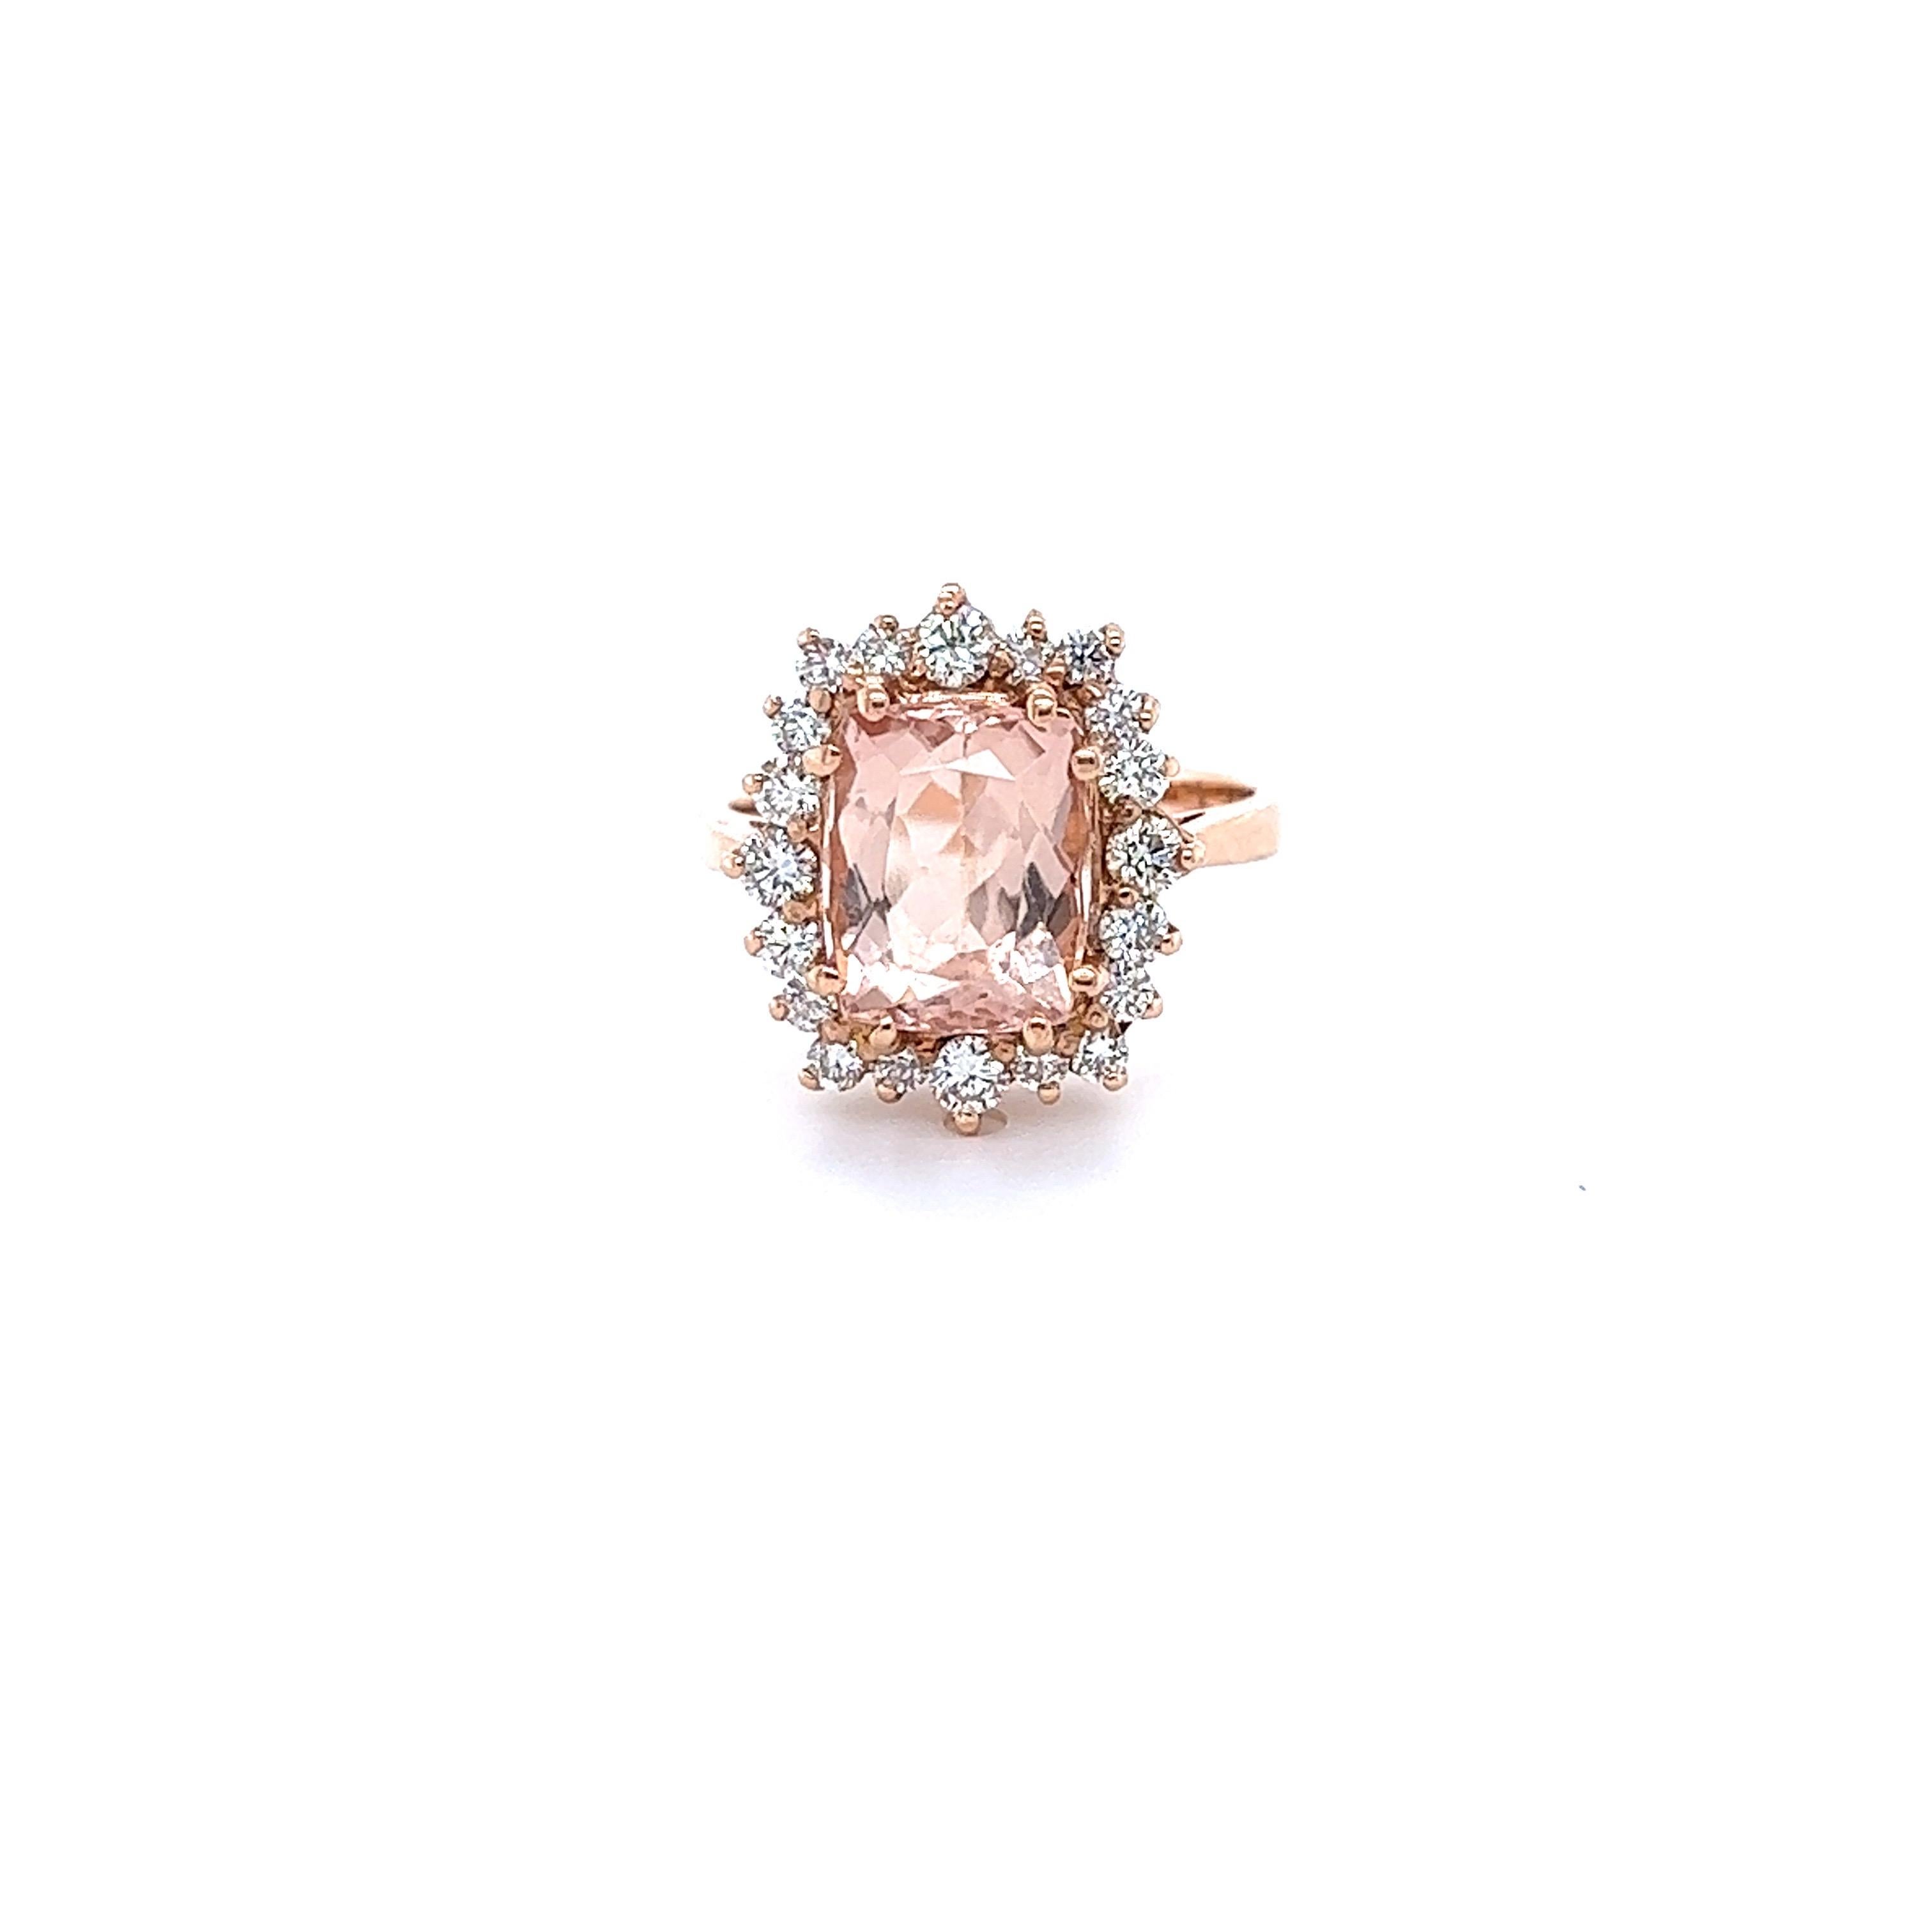 
This Morganite Diamond Ring has a 3.16 Carat Emerald Cushion Cut Peach Morganite and is surrounded by 20 Round Cut Diamonds that weigh 0.72 carats. (Clarity: VS, Color: H) The Total Carat Weight of the ring is 3.88 Carats.  

The morganite measures